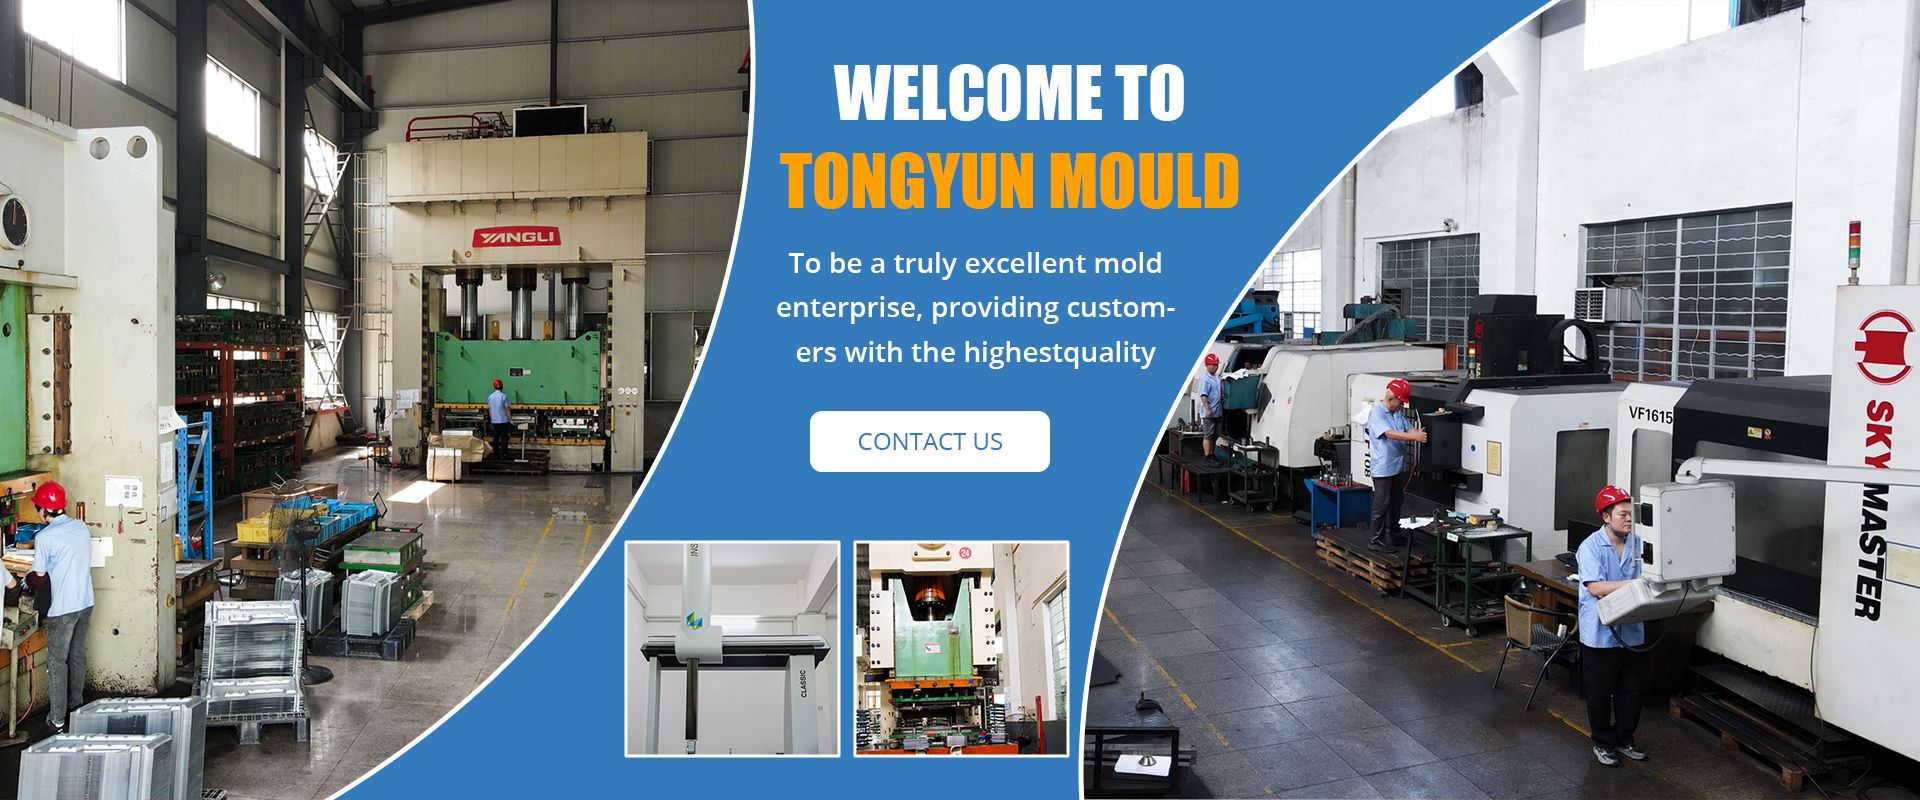 Welcome to Tongyun Mould